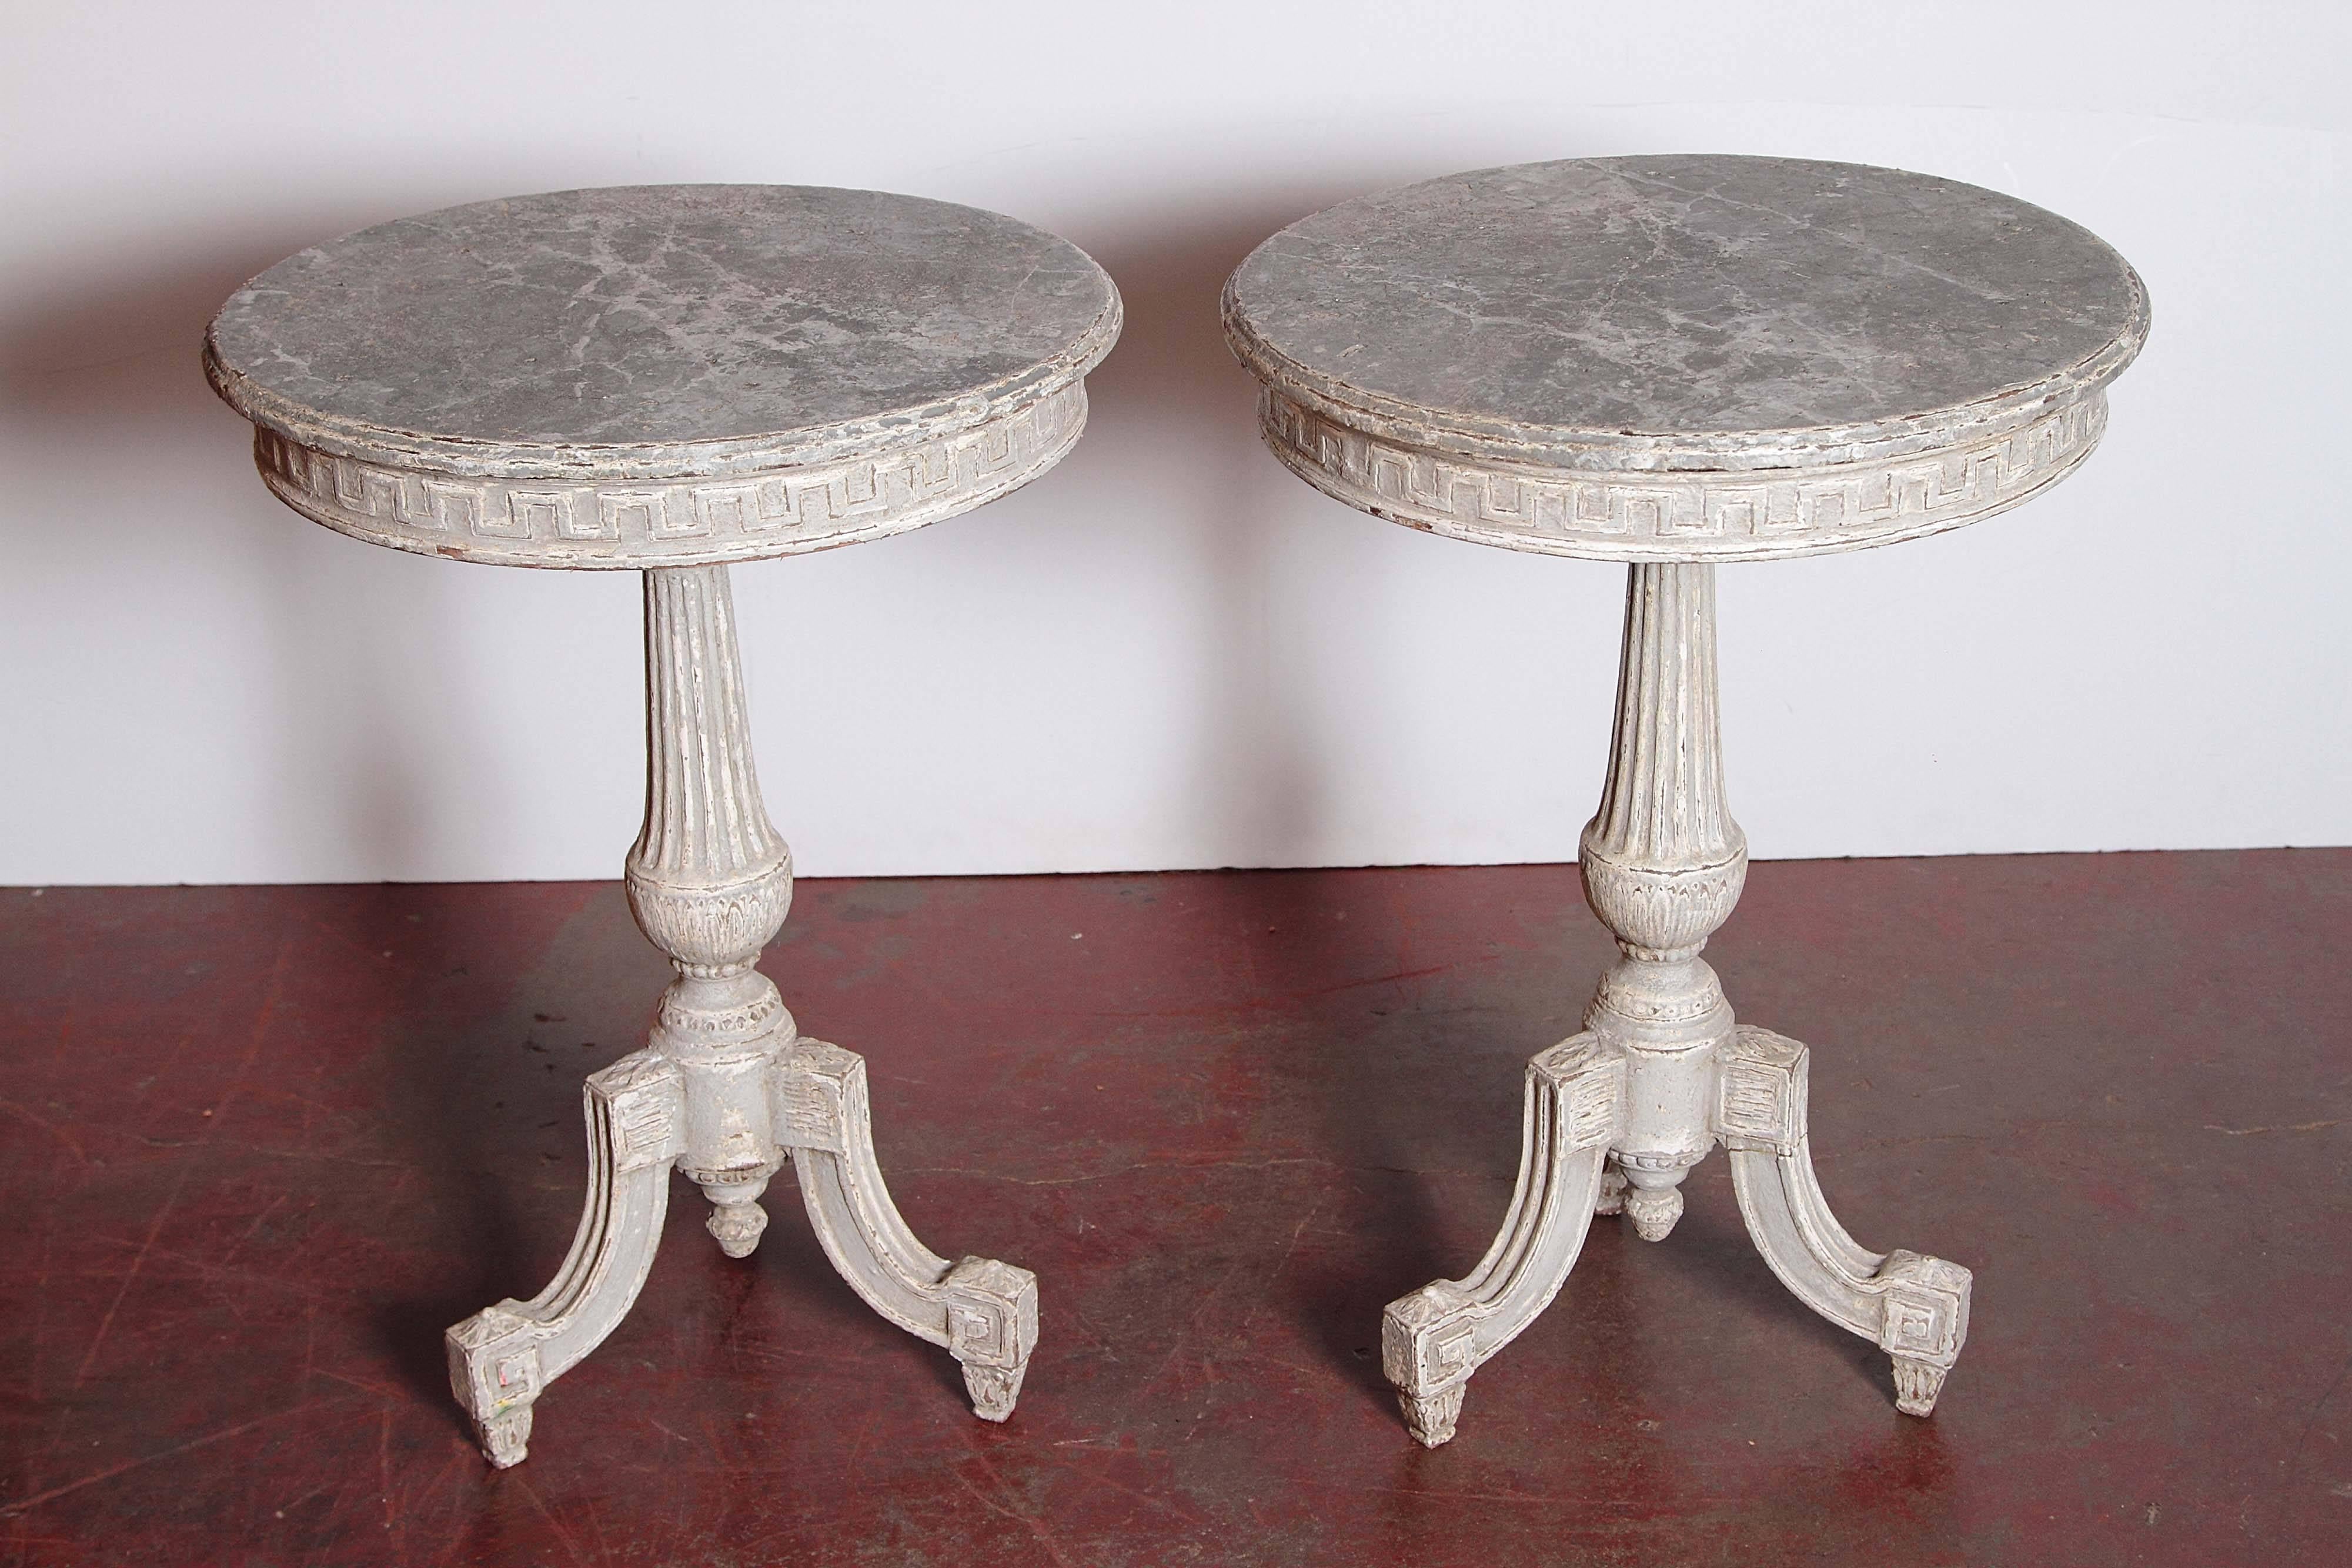 This elegant pair of antique side tables was crafted in Paris, France, circa 1880. Round in shape, each pedestal has a tapered, fluted stem, three legs and features a nicely carved apron with a Classic Greek key motif. Both tables are painted grey